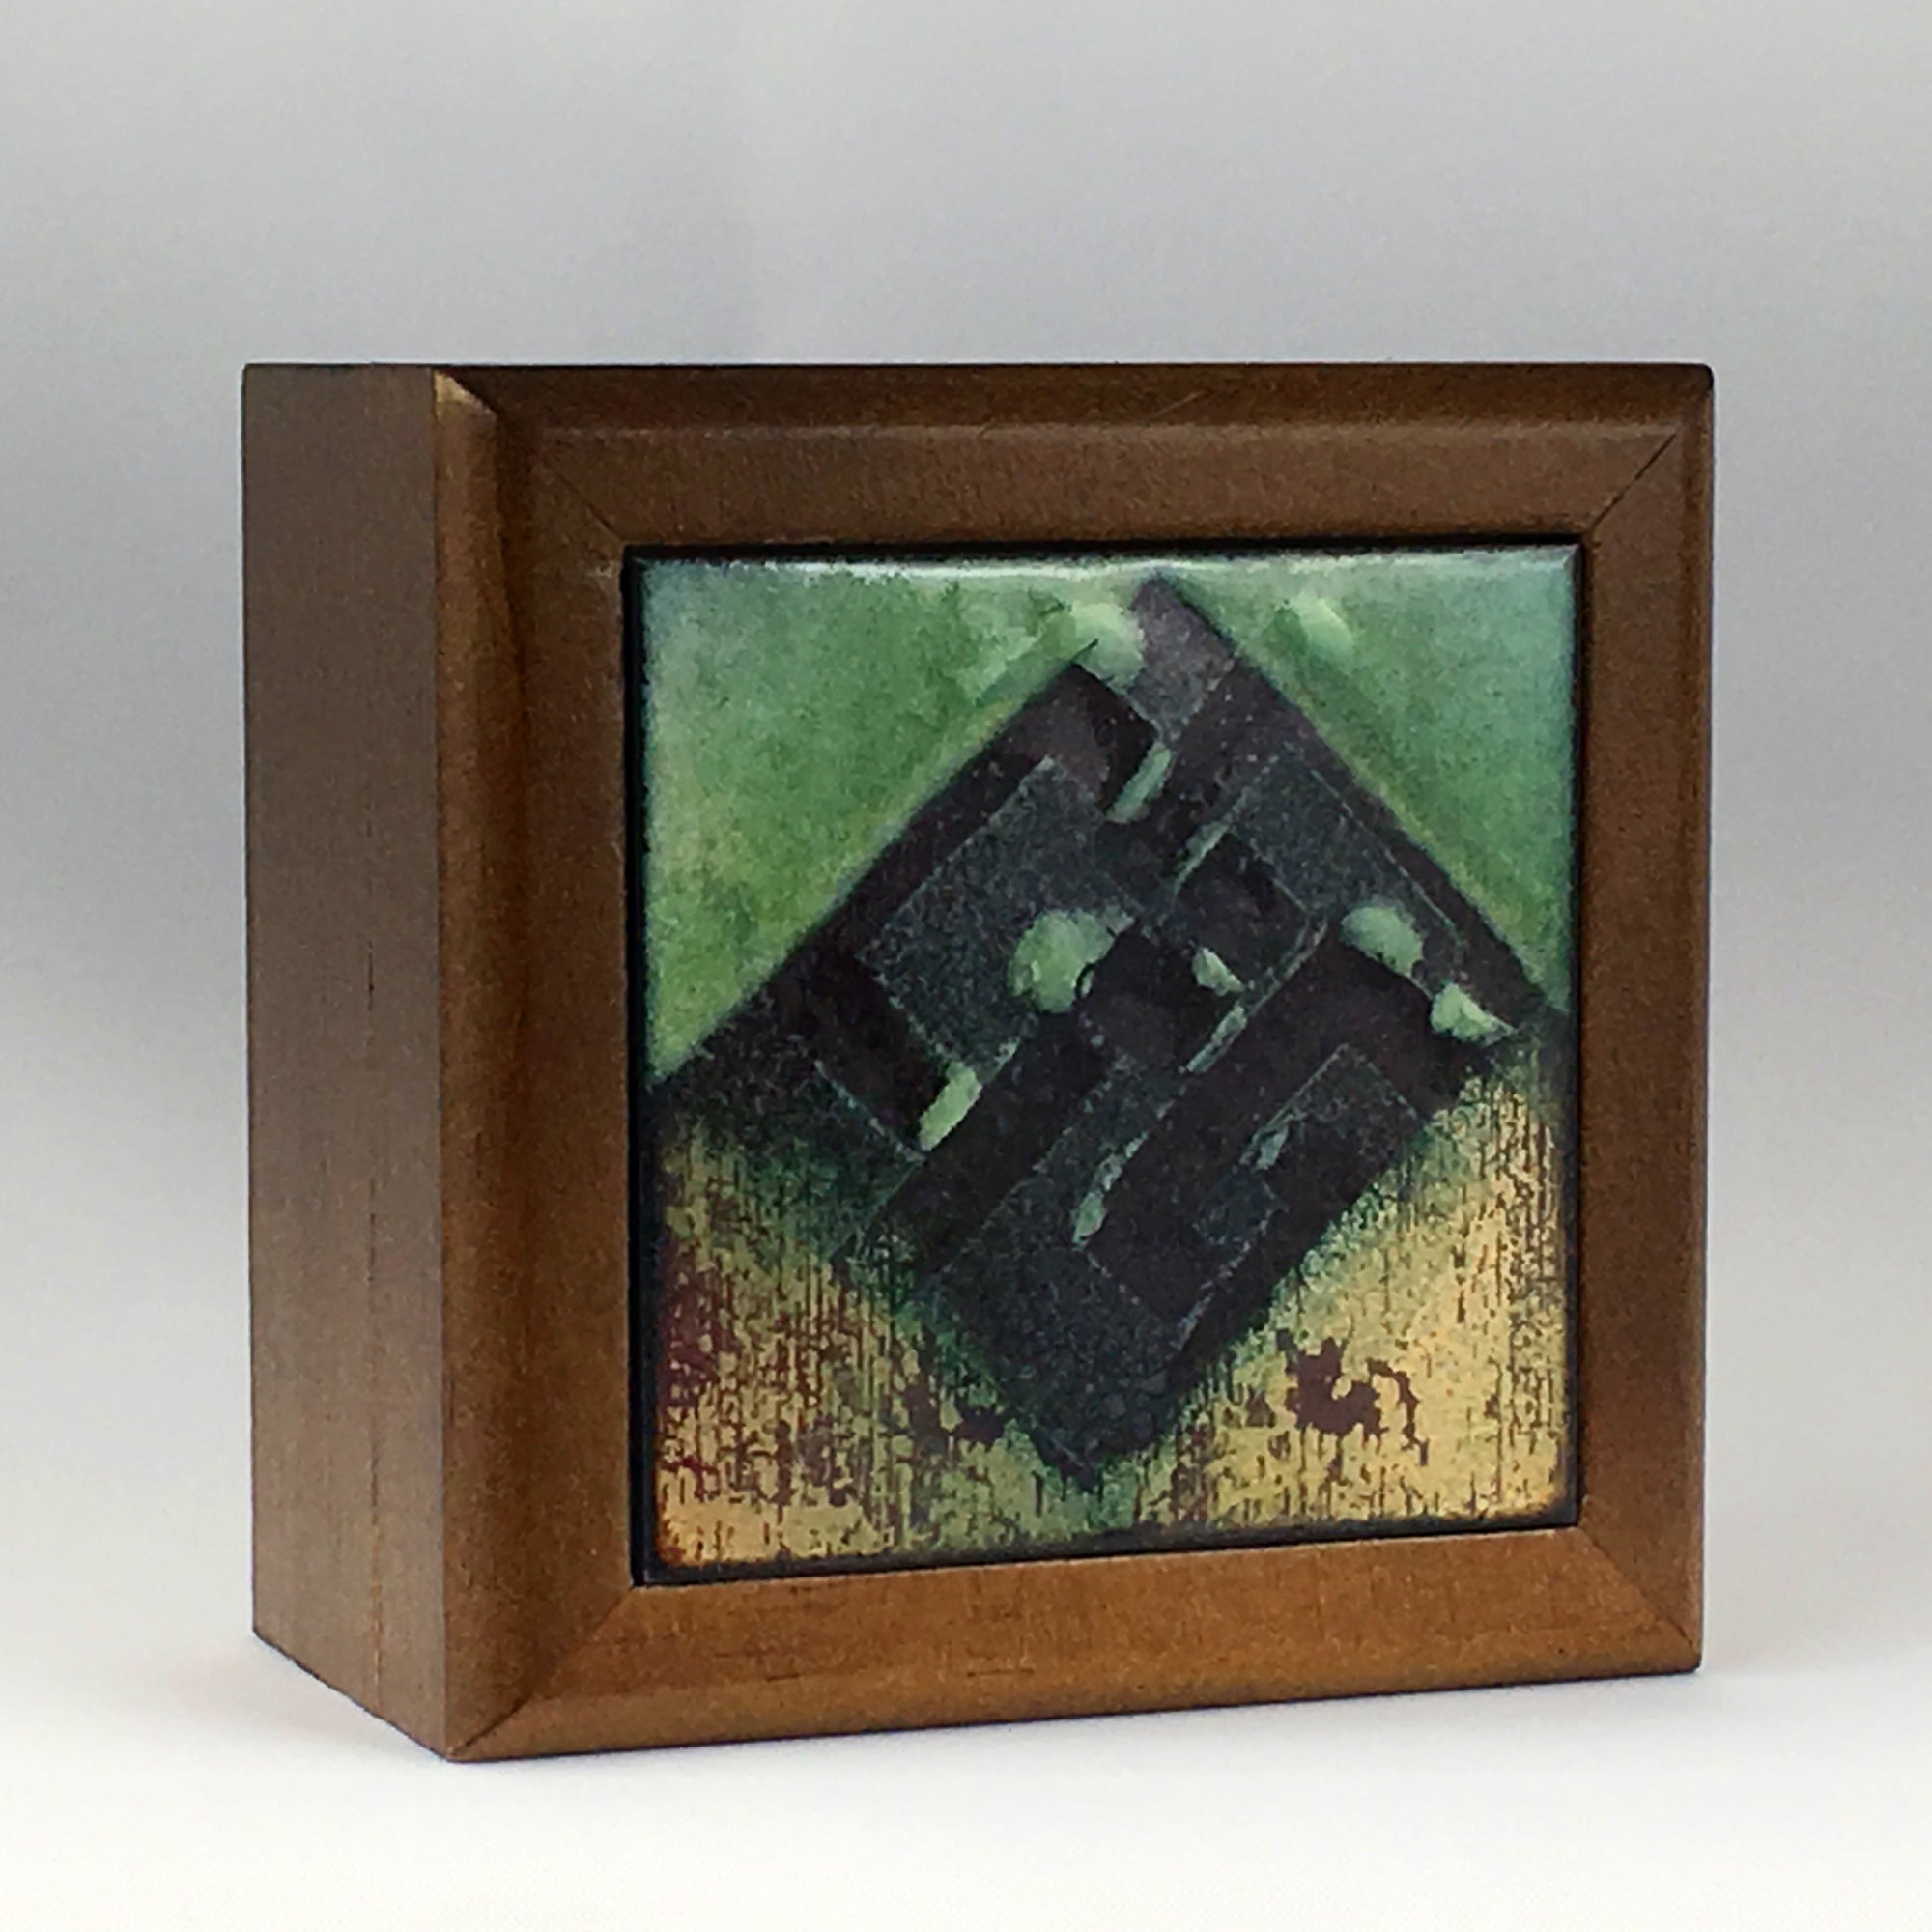 Camille Patton Grand Tour Vitreous Enamel Inlay in lid of wooden box